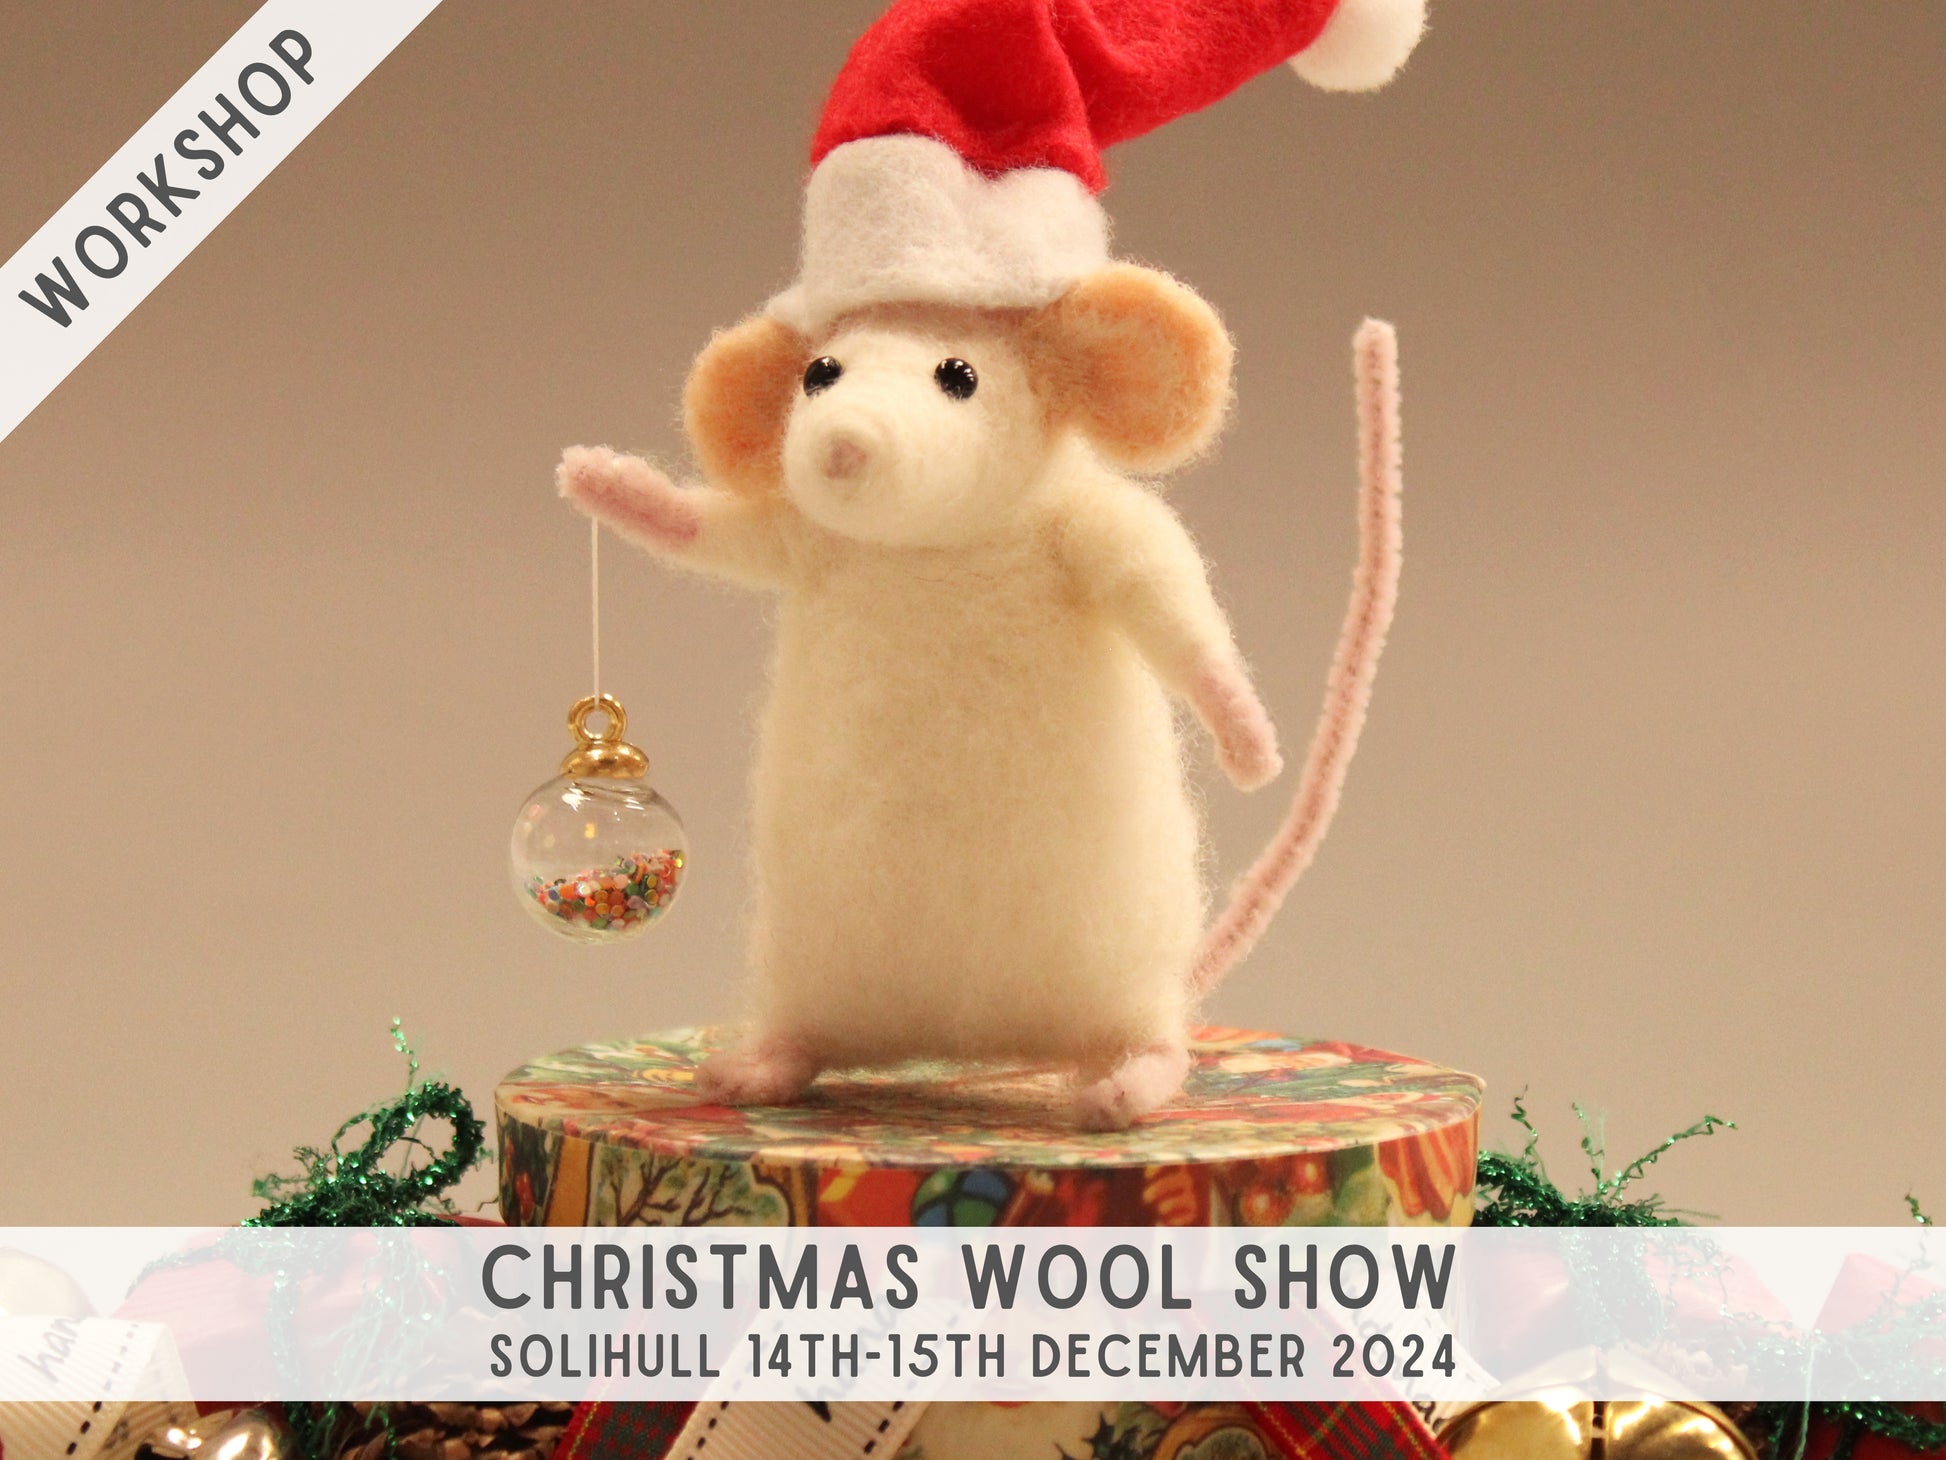 Christmas Wool Show - Christmas Mouse Workshop with Steffi Stern - The Makerss